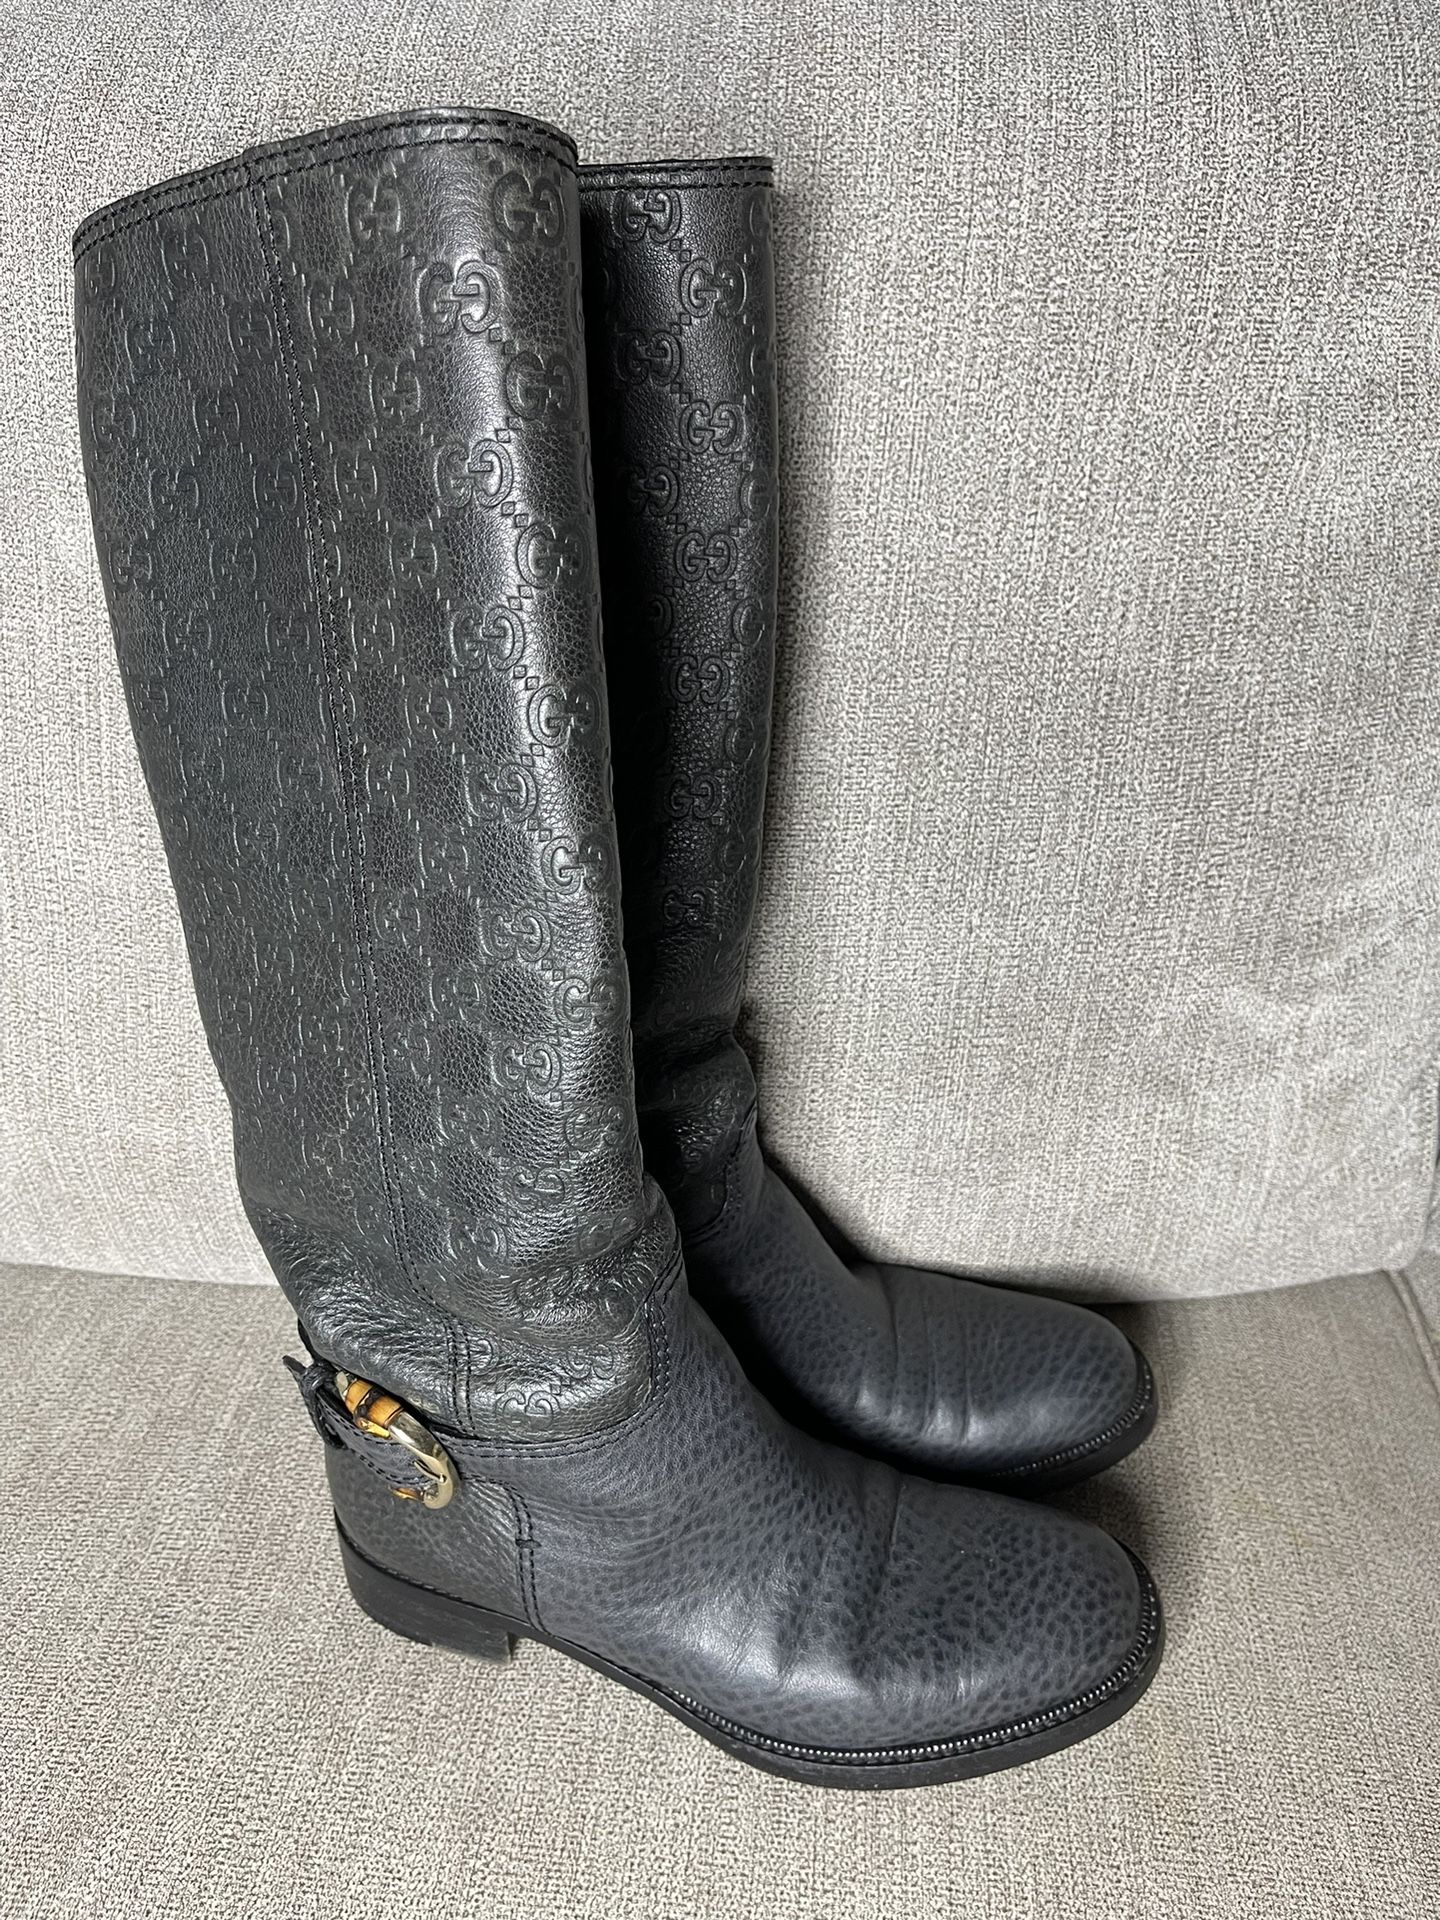 Gucci Leather Boots Sz 36 1/2 (6.5 US)